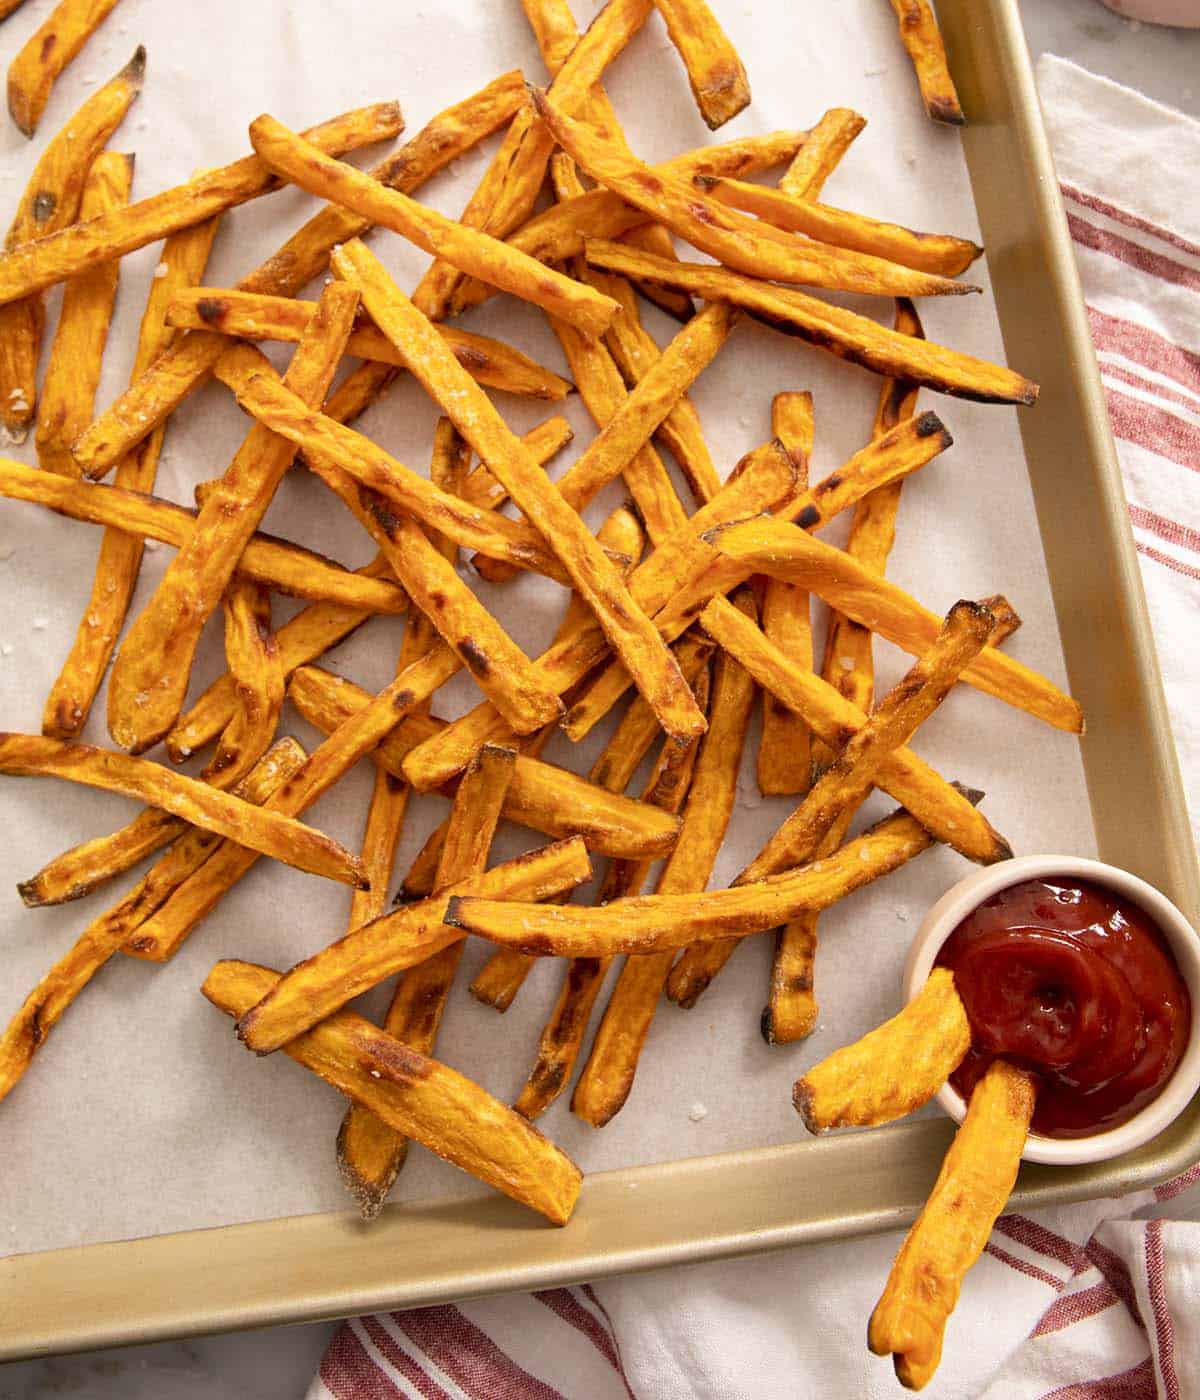 Sweet potato fries on a baking sheet with a small bowl of ketchup.